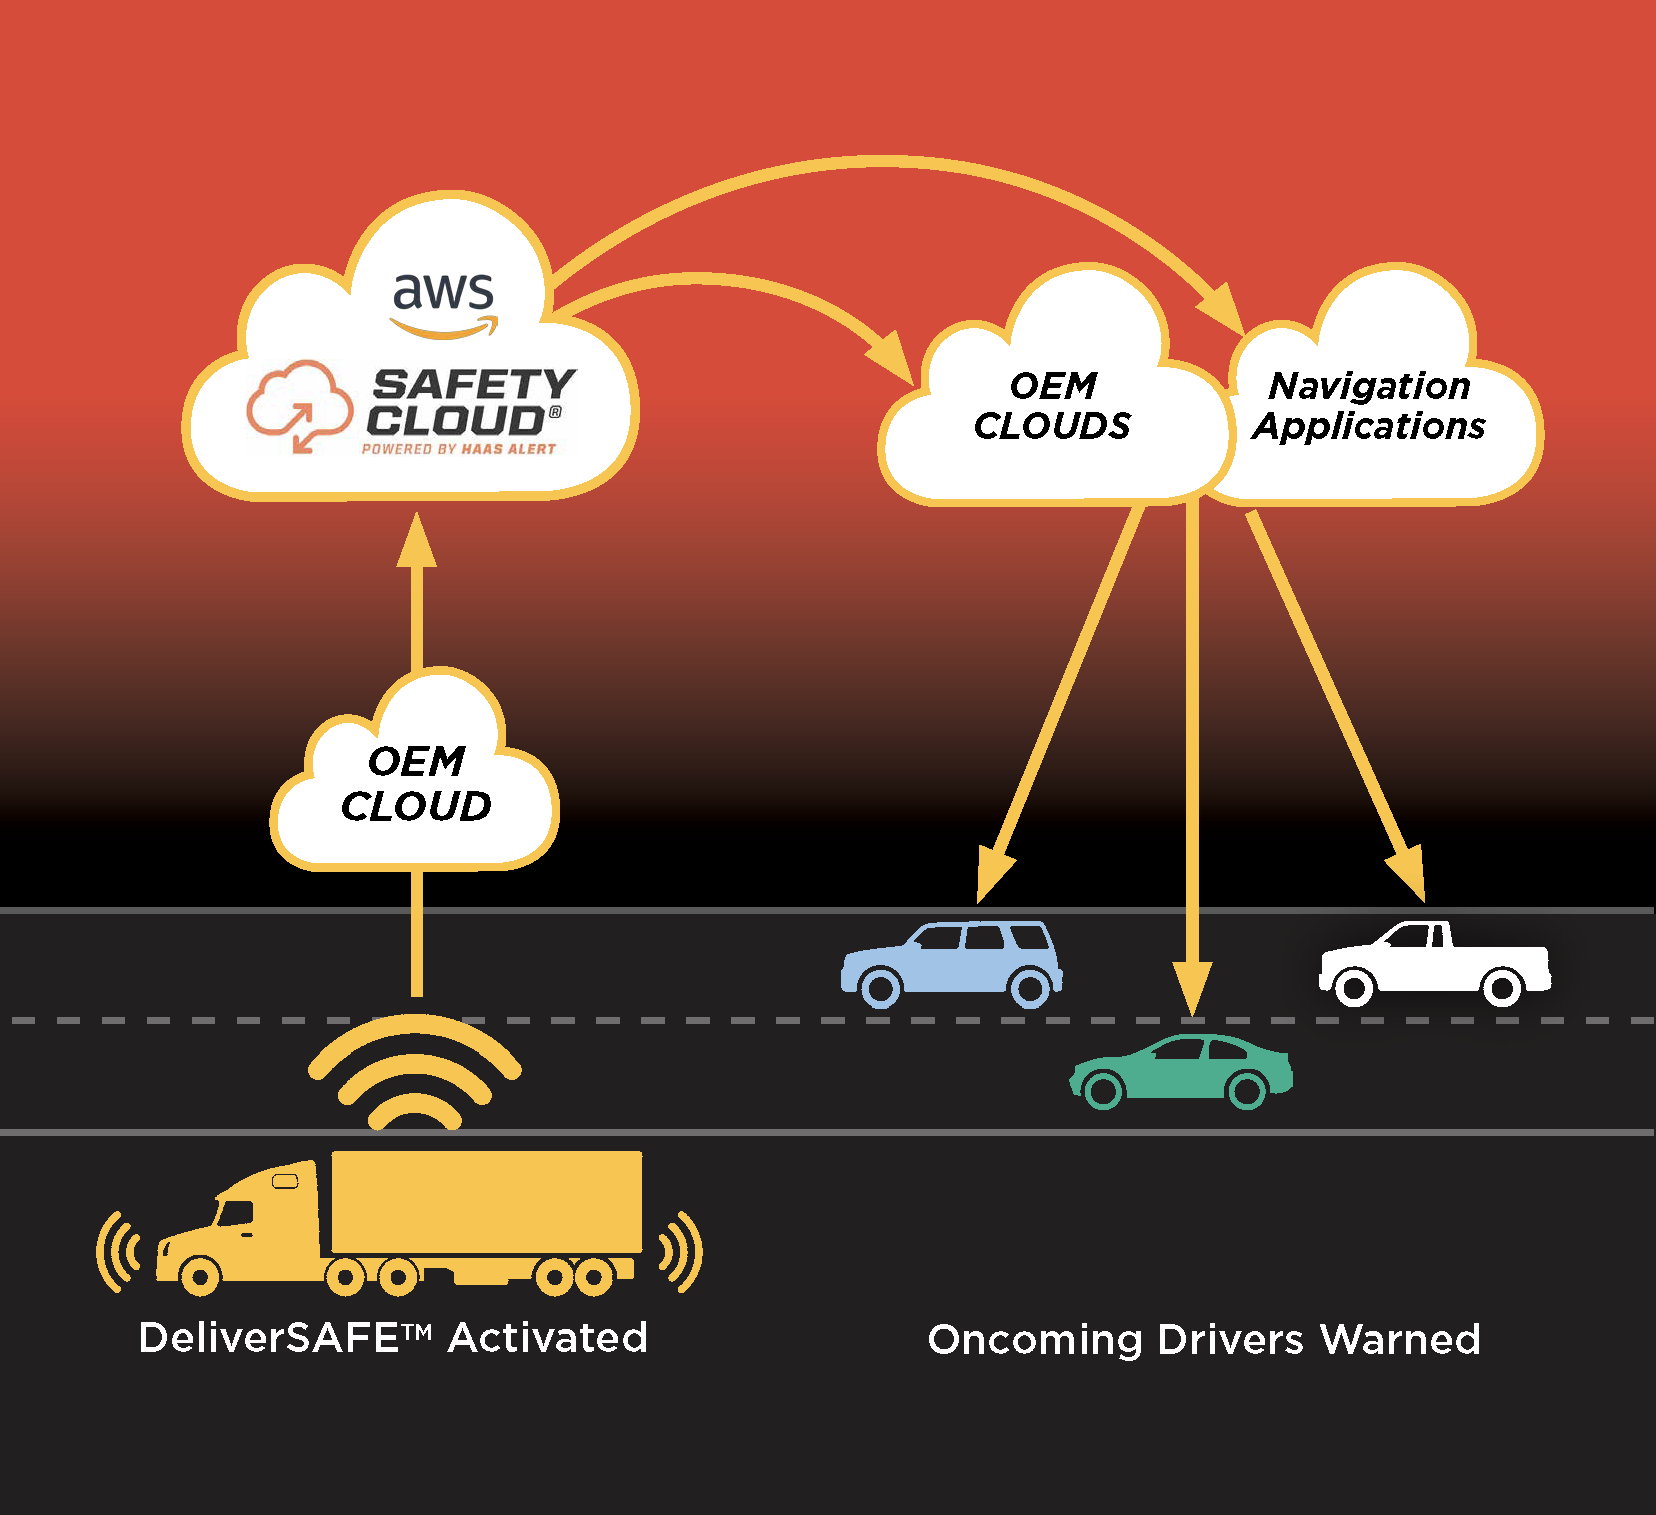 An image showing a map of the vehicle-to-vehicle communication chain via Safety Cloud. The image has arrows showing that alerts from a commercial vehicle are sent to a cloud communication platform and can then be distributed to cloud networks maintained by OE manufacturers or to navigation applications on a driver's mobile device.